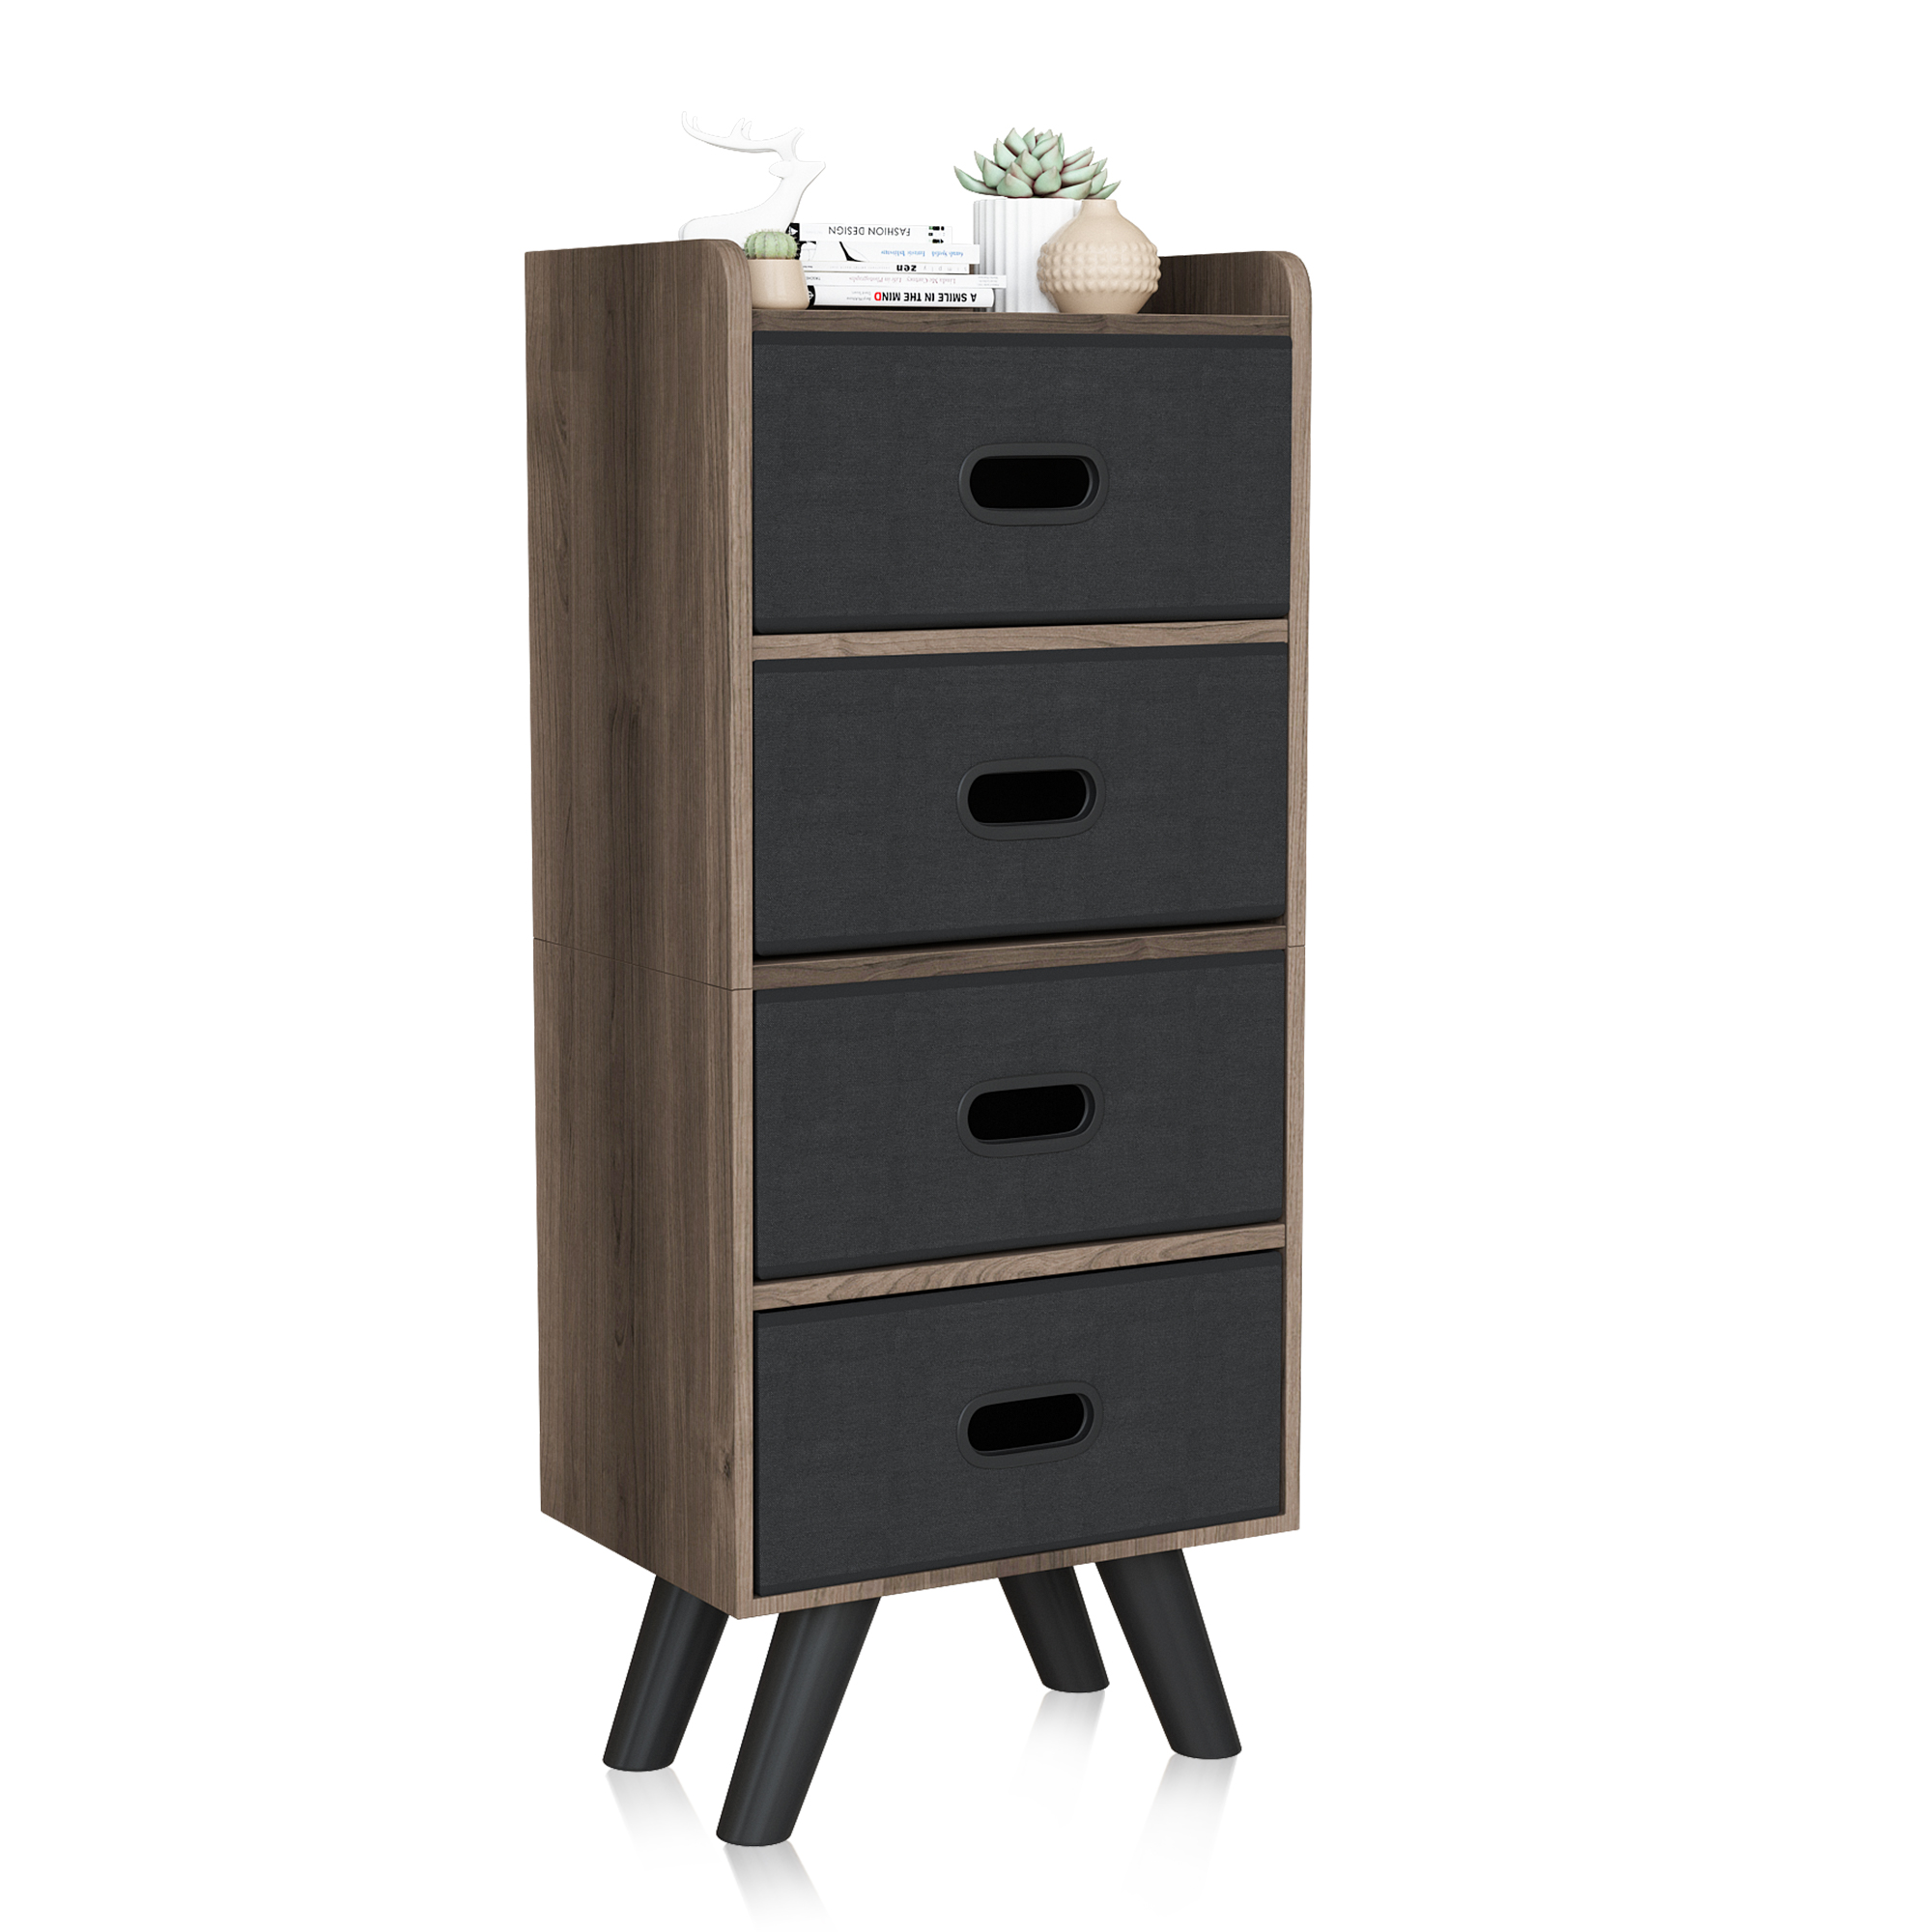 4 Drawer Fabric Dresser Storage Tower, 4-Tier Wide Drawer Dresser, Fabric Storage Tower with Handrail and Removable Drawers, Organizer Unit for Bedroom, Closet, Entryway, Hallway, Nursery Ro-Boyel Living